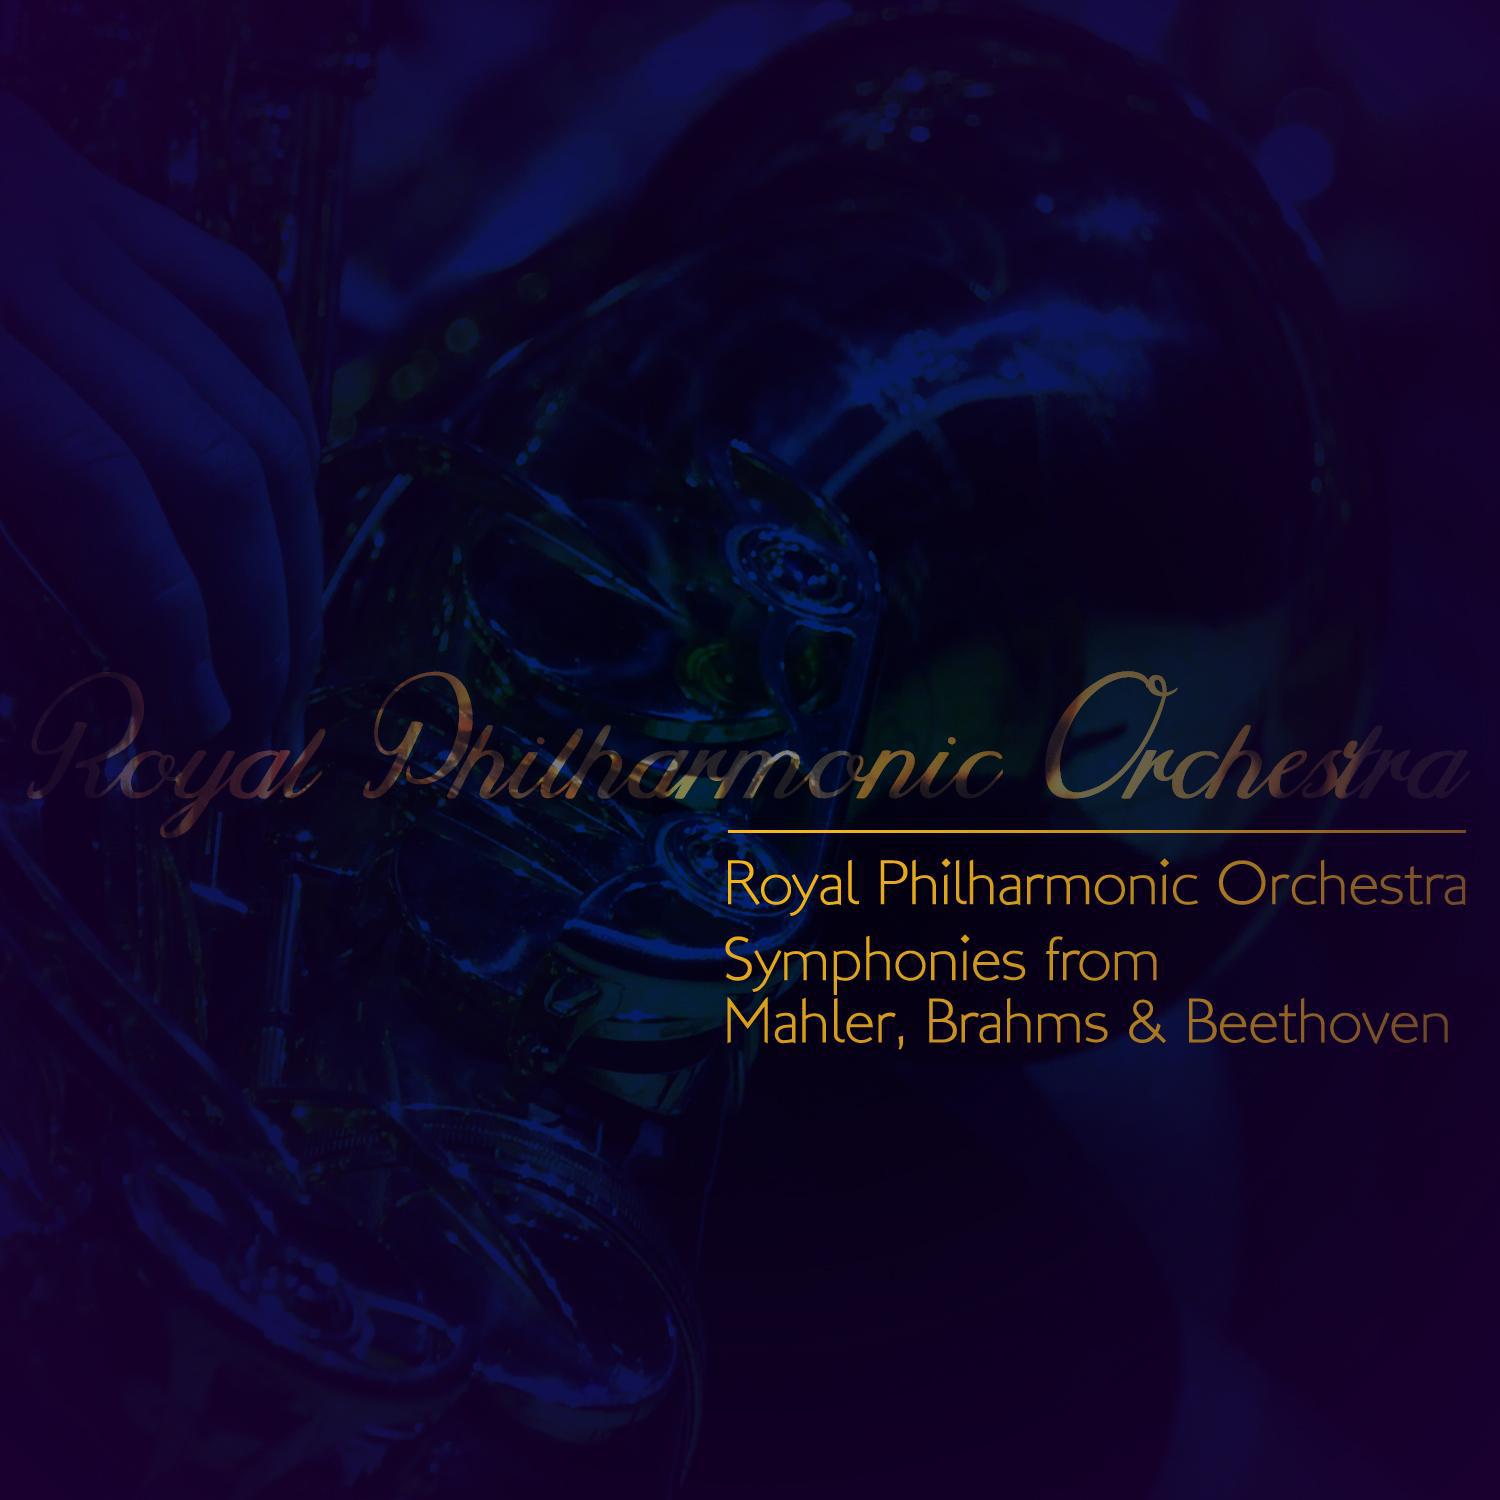 Royal Philharmonic Orchestra: Symphonies from Mahler, Brahms & Beethoven专辑